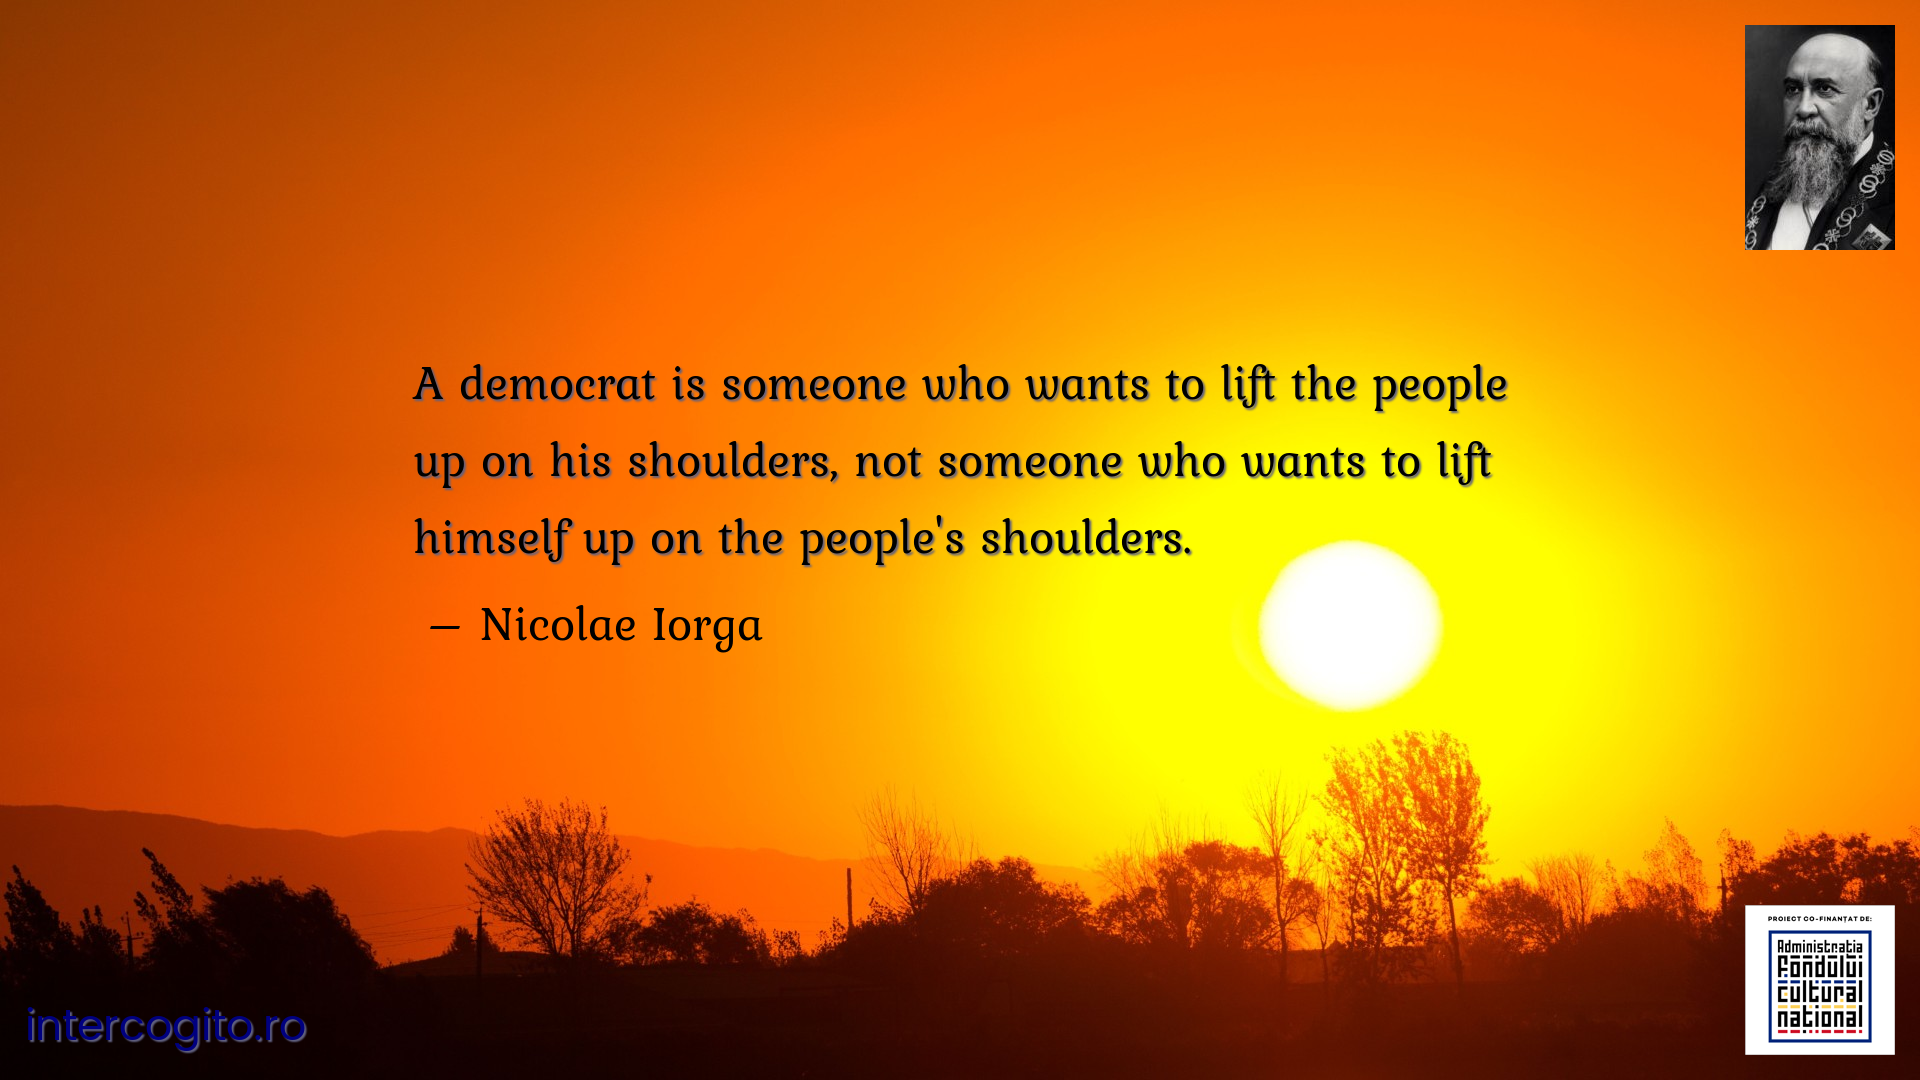 A democrat is someone who wants to lift the people up on his shoulders, not someone who wants to lift himself up on the people's shoulders.